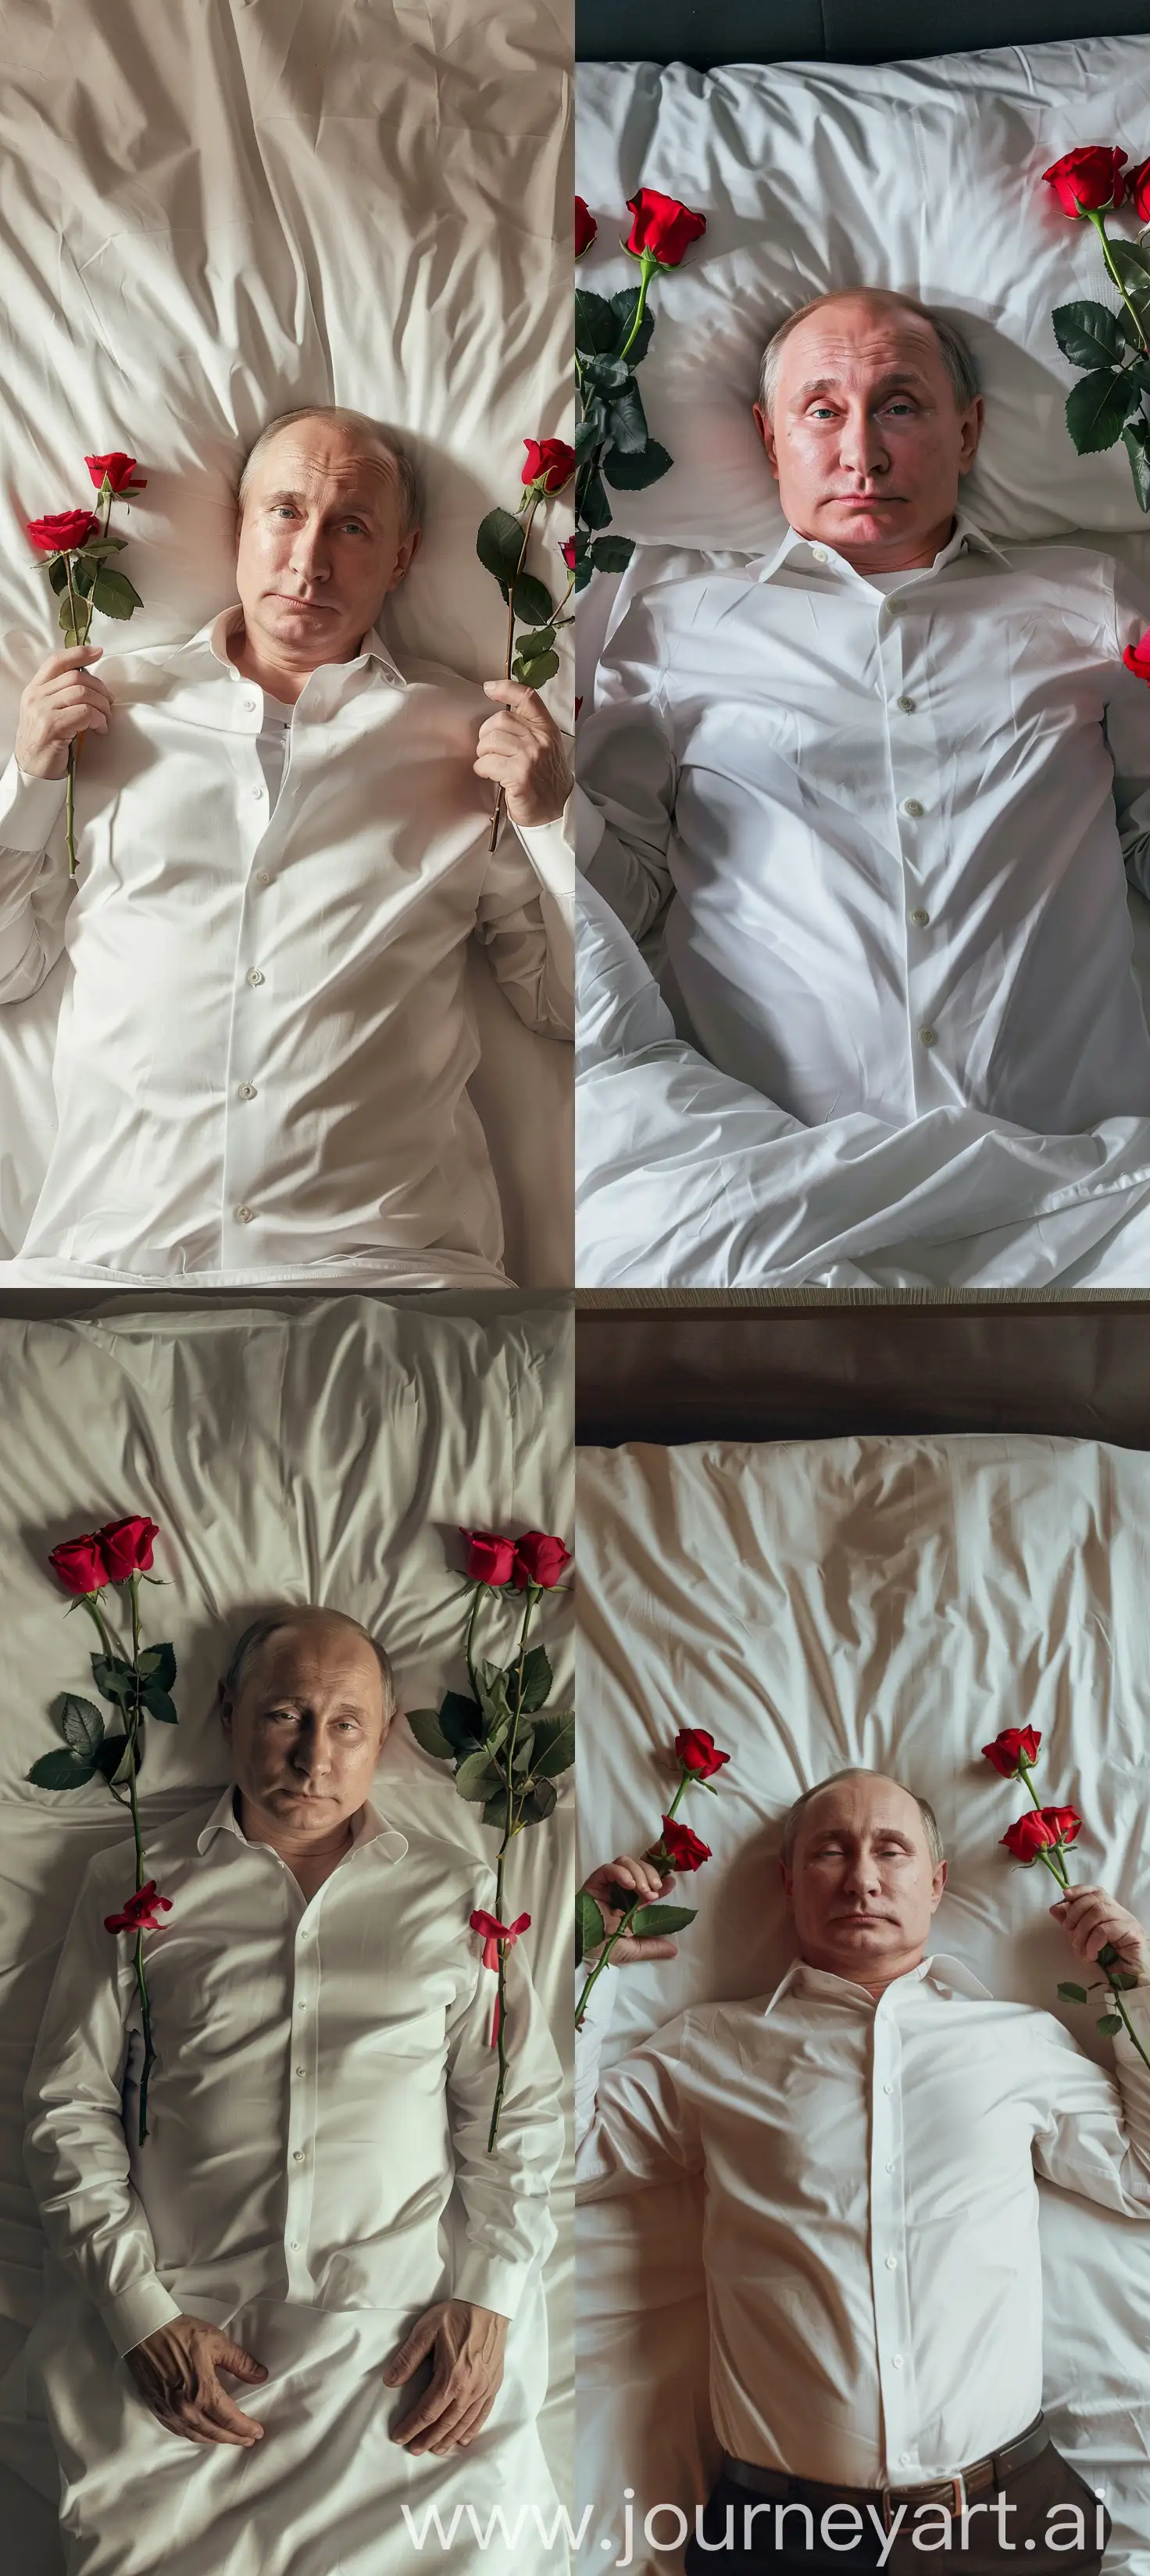 phone photo, Vladimir Putin laying in bed with red roses on the end of his hands, posted to reddit in 2018, white shirt, romantic atmosphere --ar 57:128